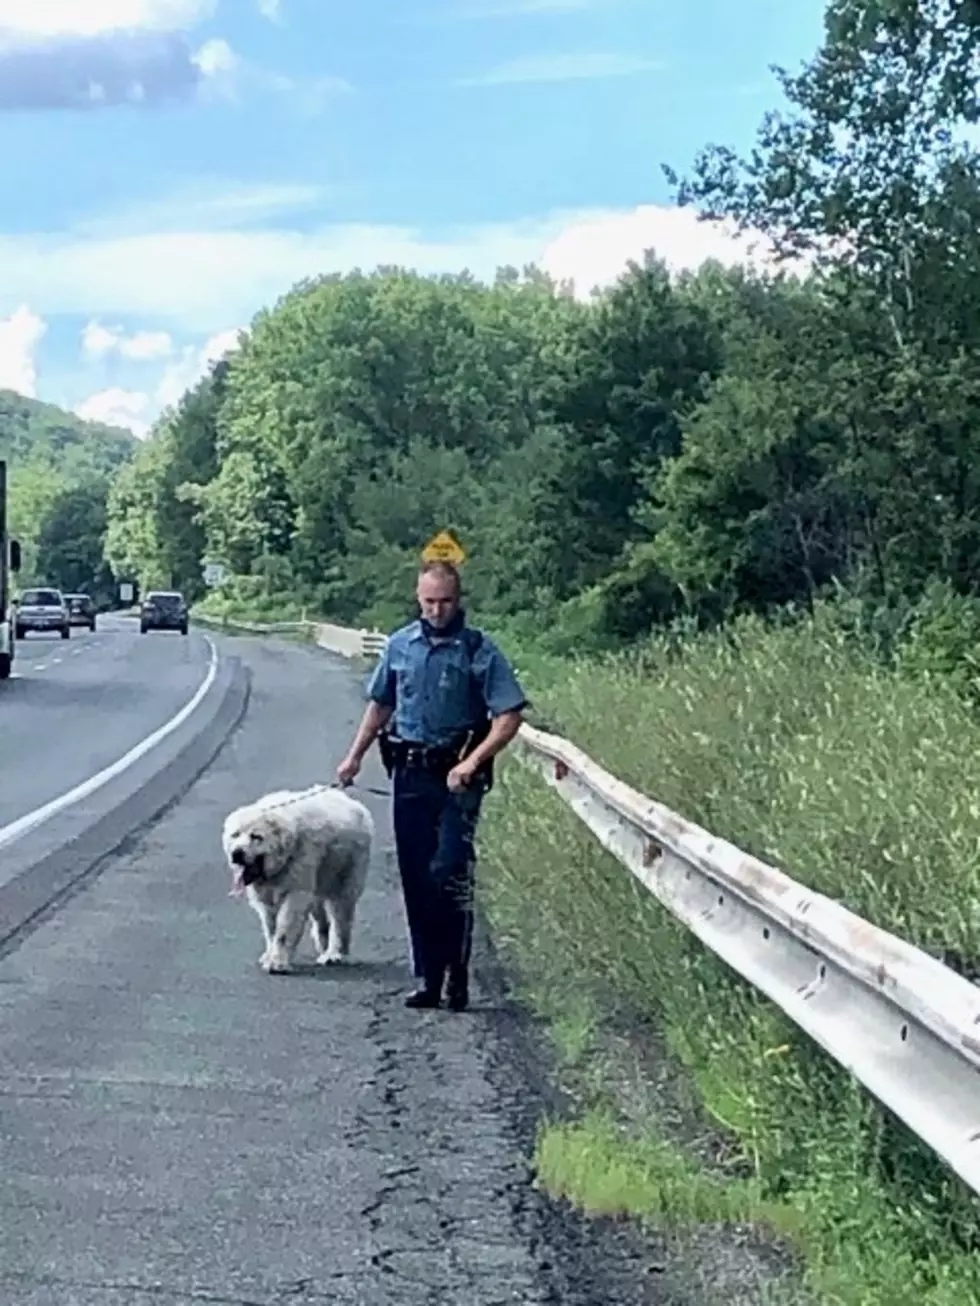 Dog on the Mass Pike…Troopers from the Lee Barracks Spring into Action